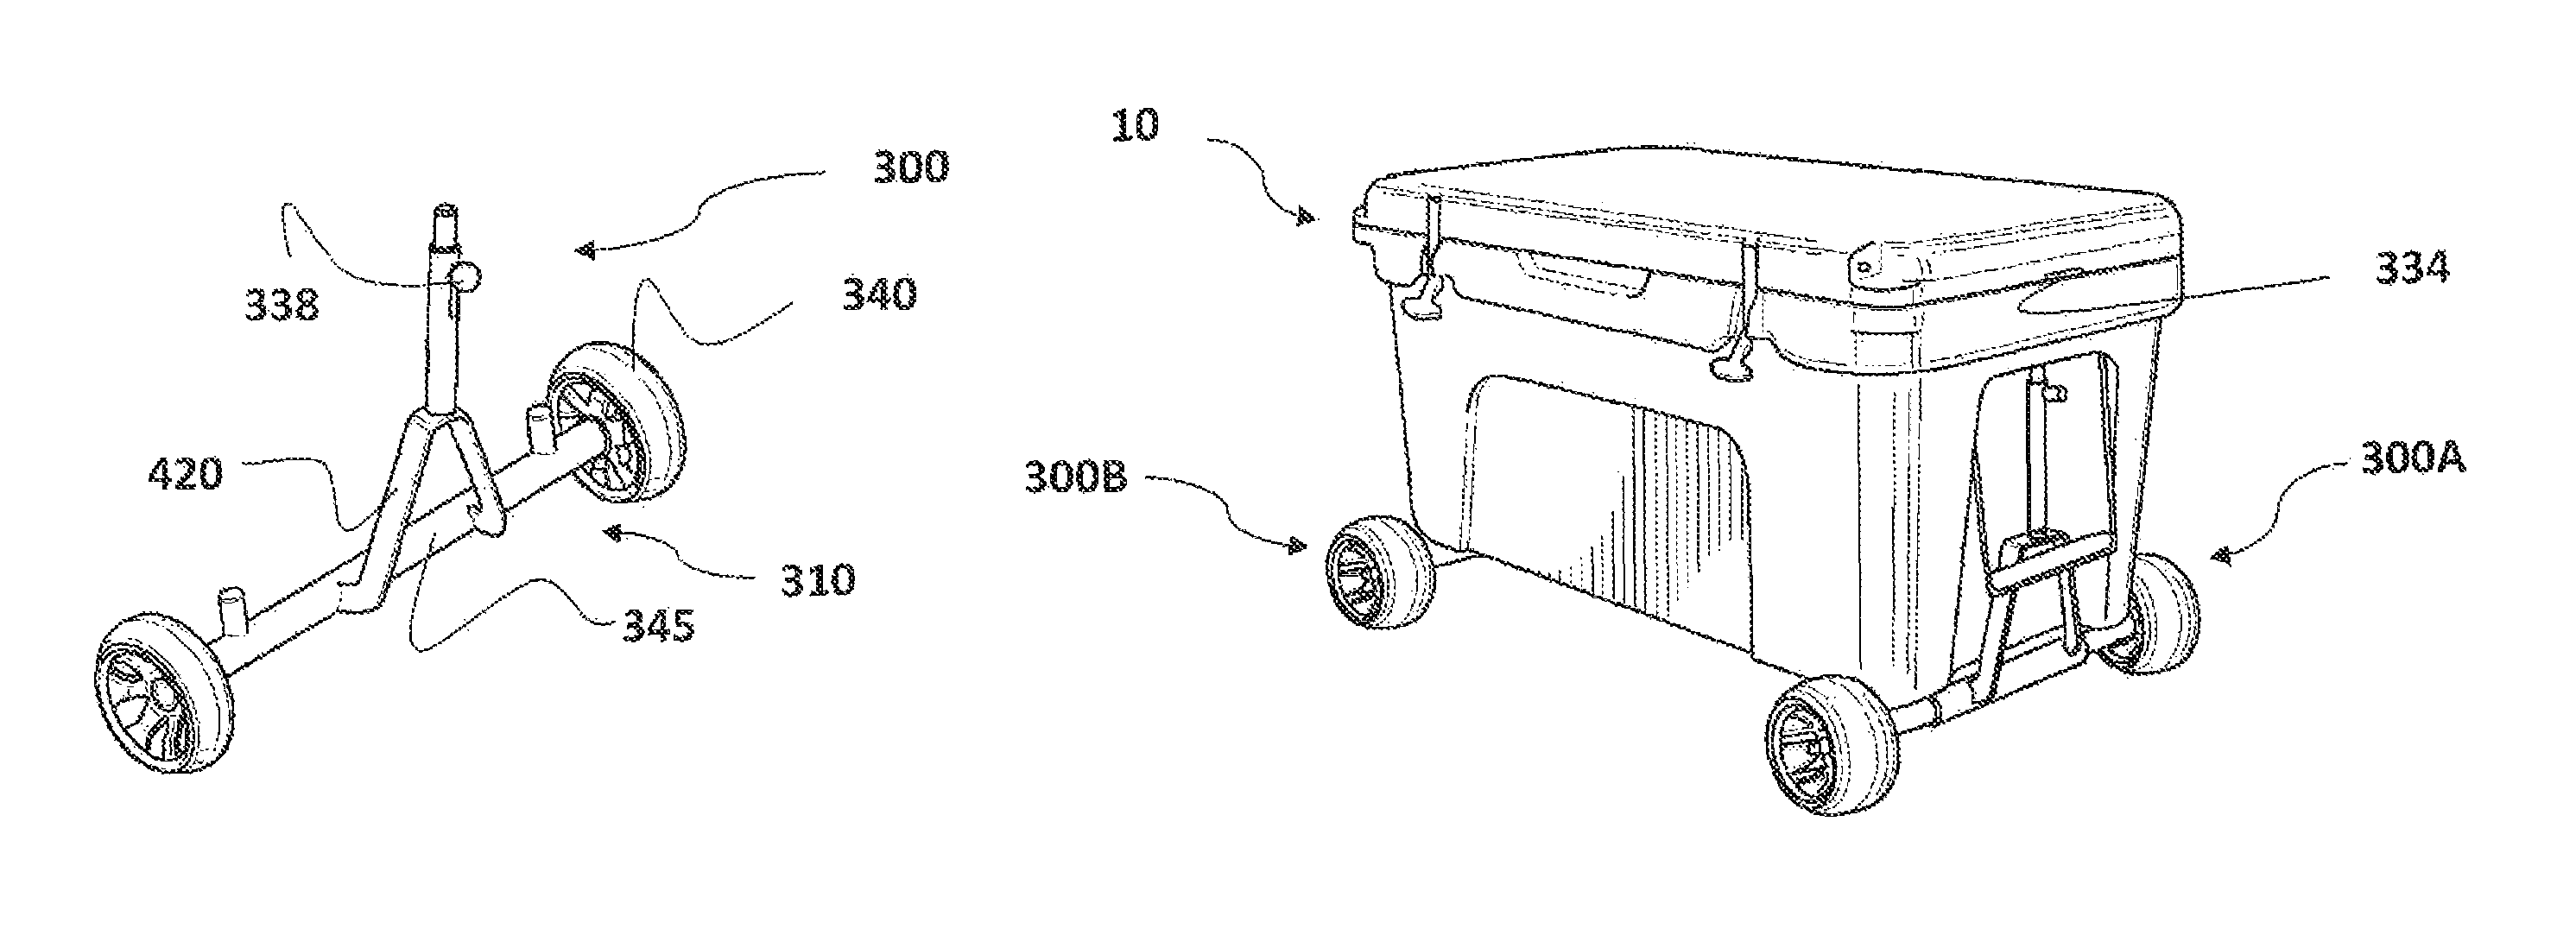 External frame system and method for mounting